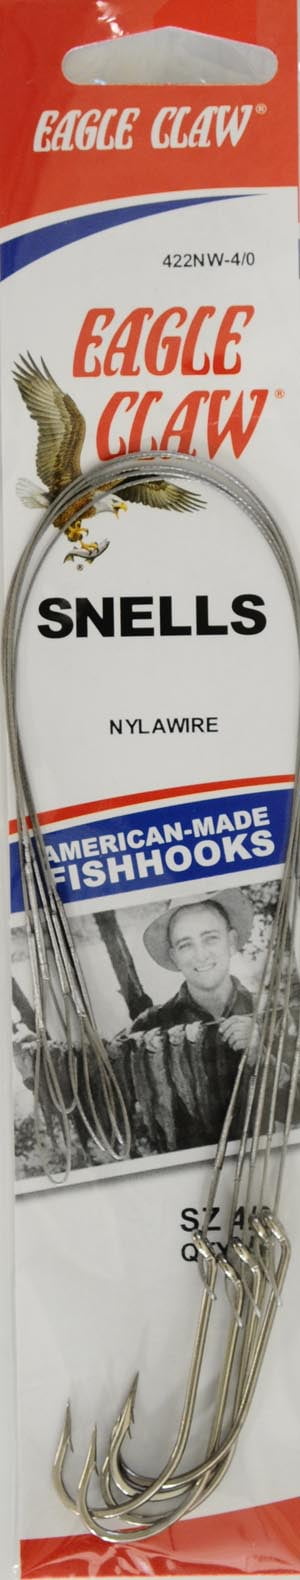 Eagle Claw 422nwh-2 Nylawire Leader with O'Shaughnessy Hook, Nickel, Size 2, 5 Pack